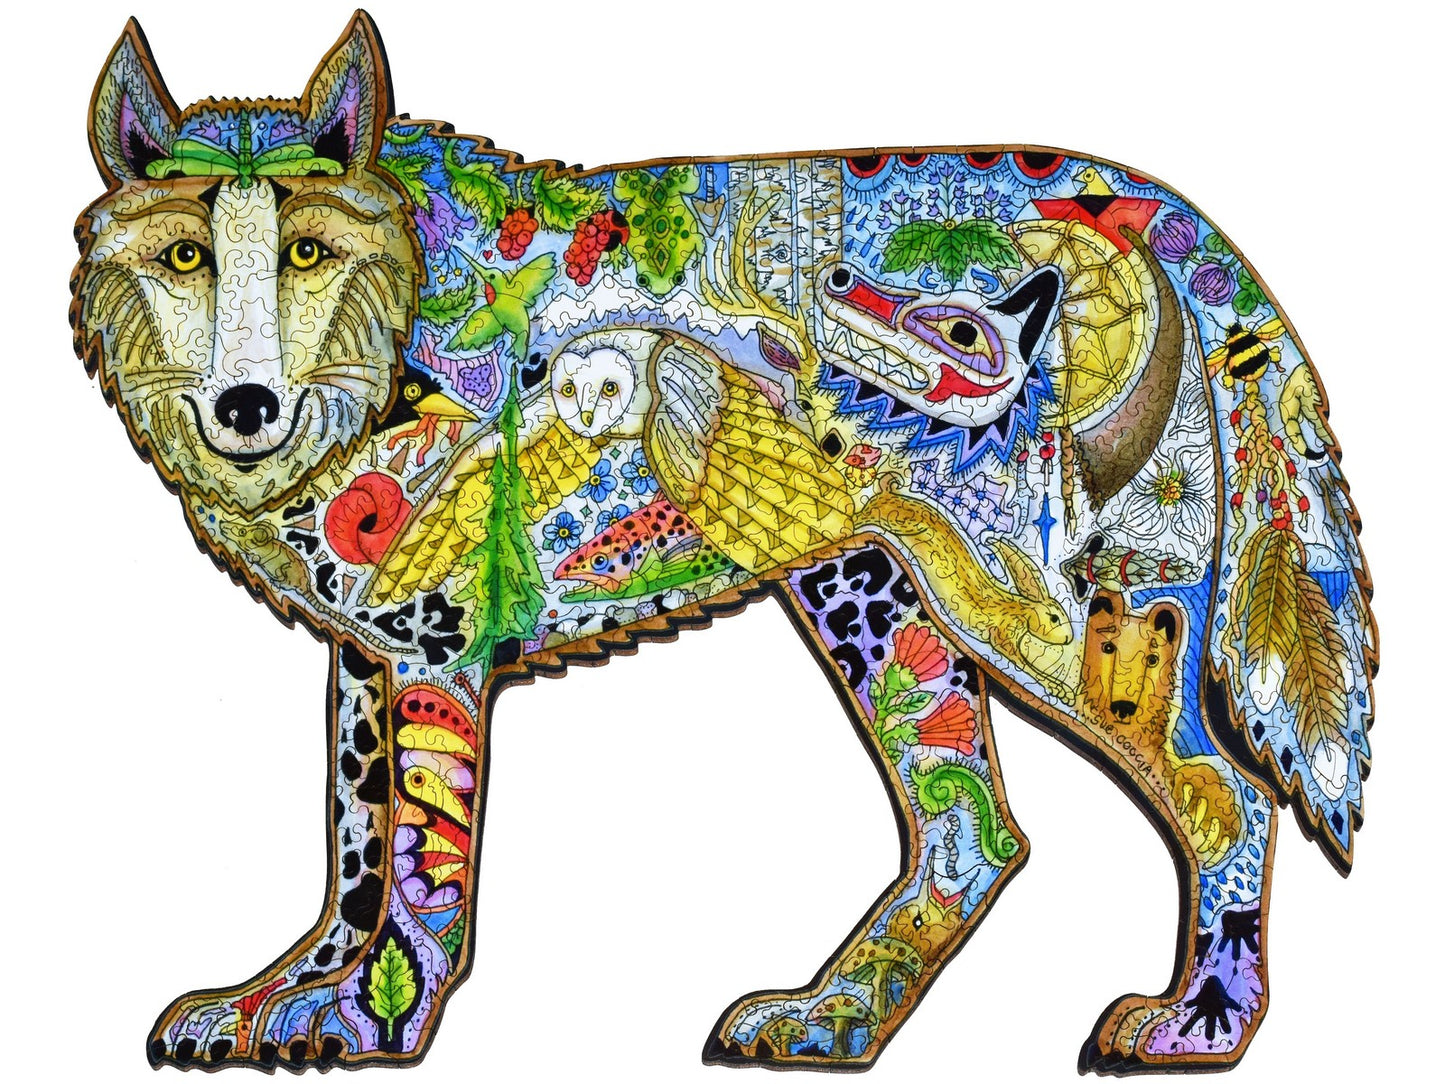 The front of the puzzle, Wolf, which shows colorful drawings of various plants and animals in the shape of a wolf.